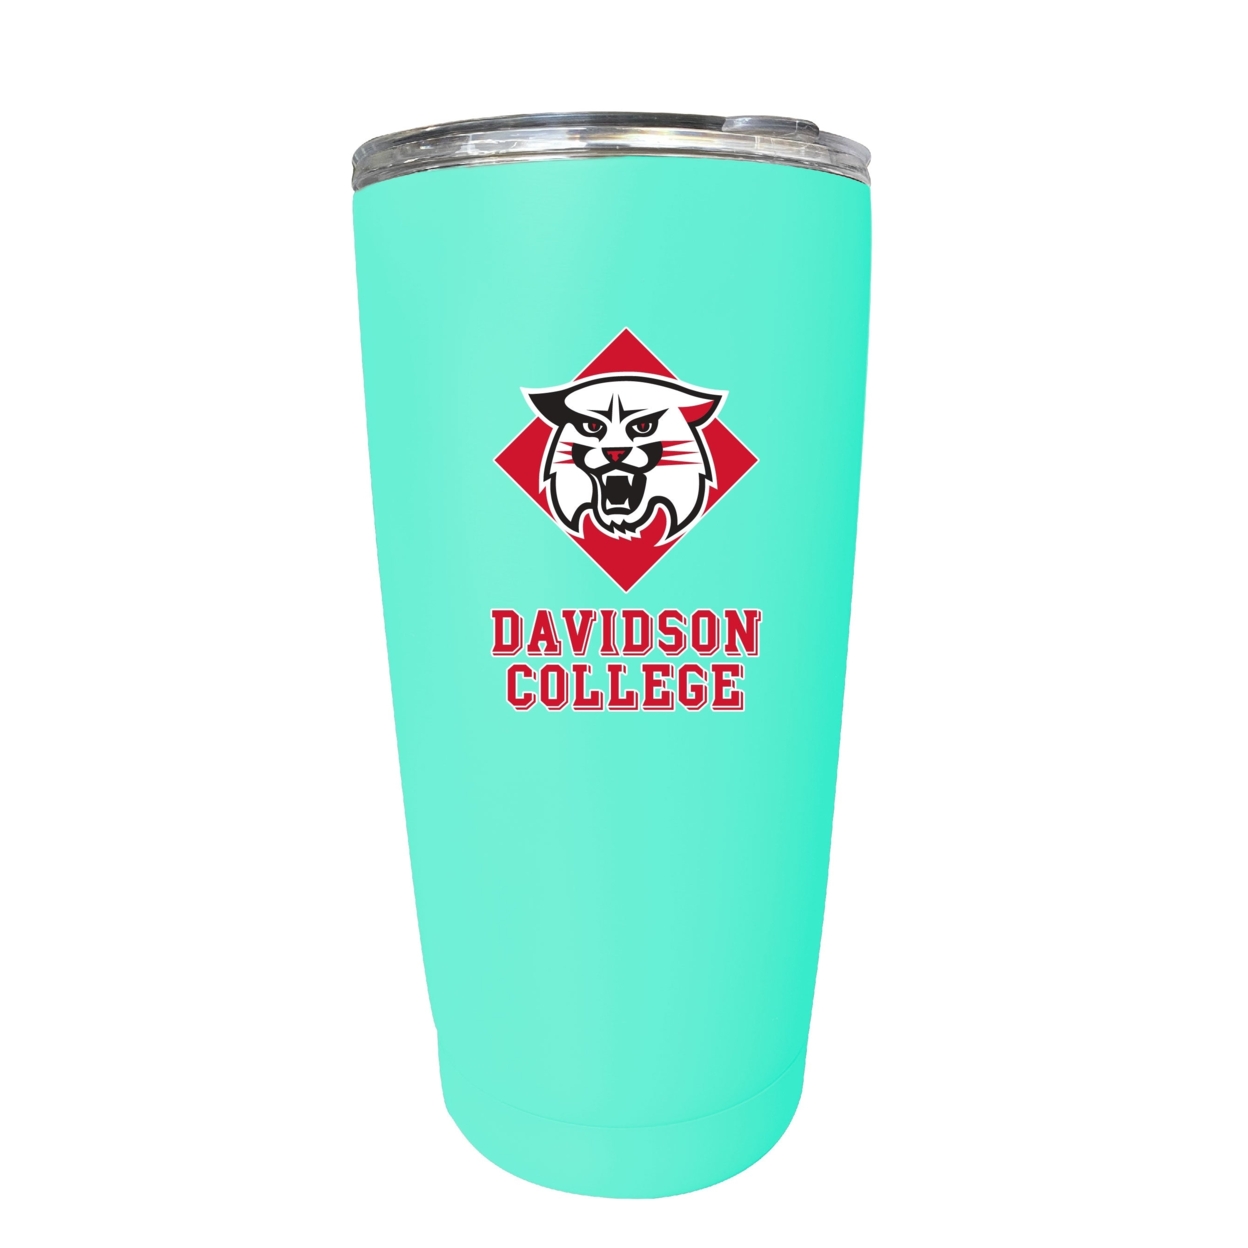 Davidson College 16 Oz Insulated Stainless Steel Tumblers - Choose Your Color - Seafoam